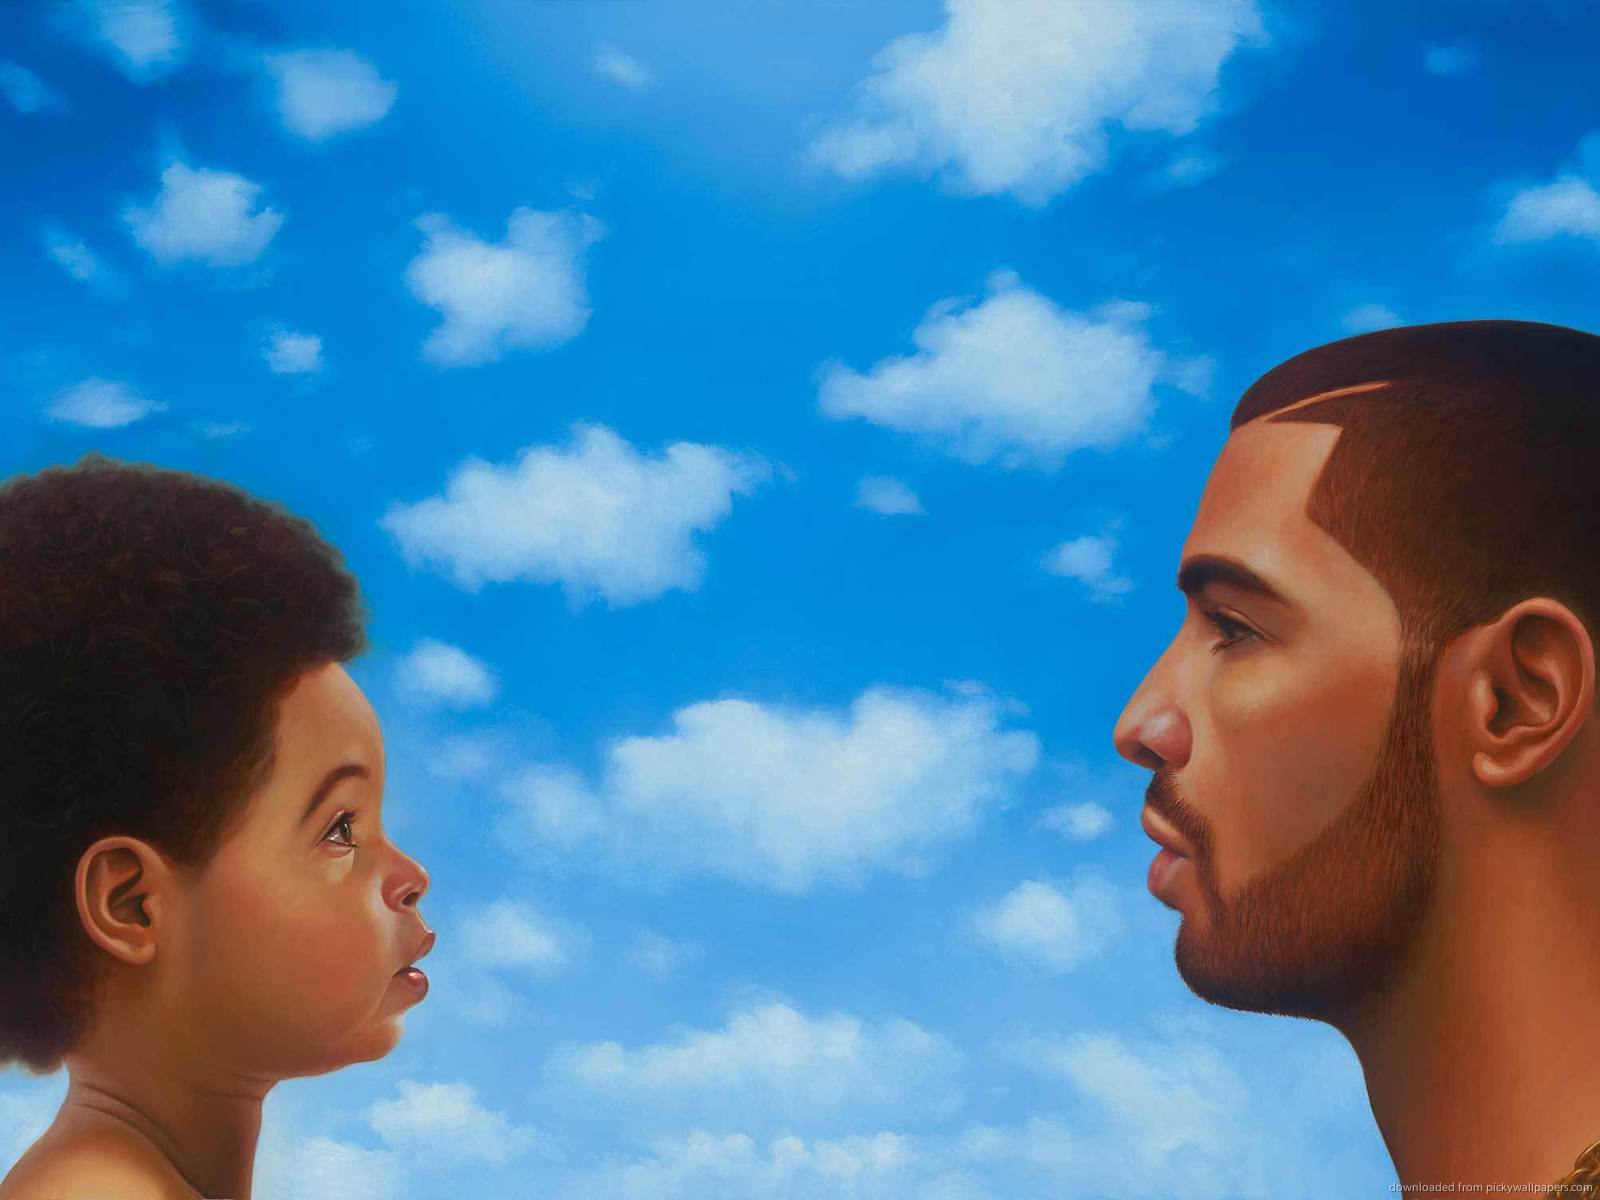 Download 1600x1200 Drake Nothing Was The Same Album Cover Wallpaper